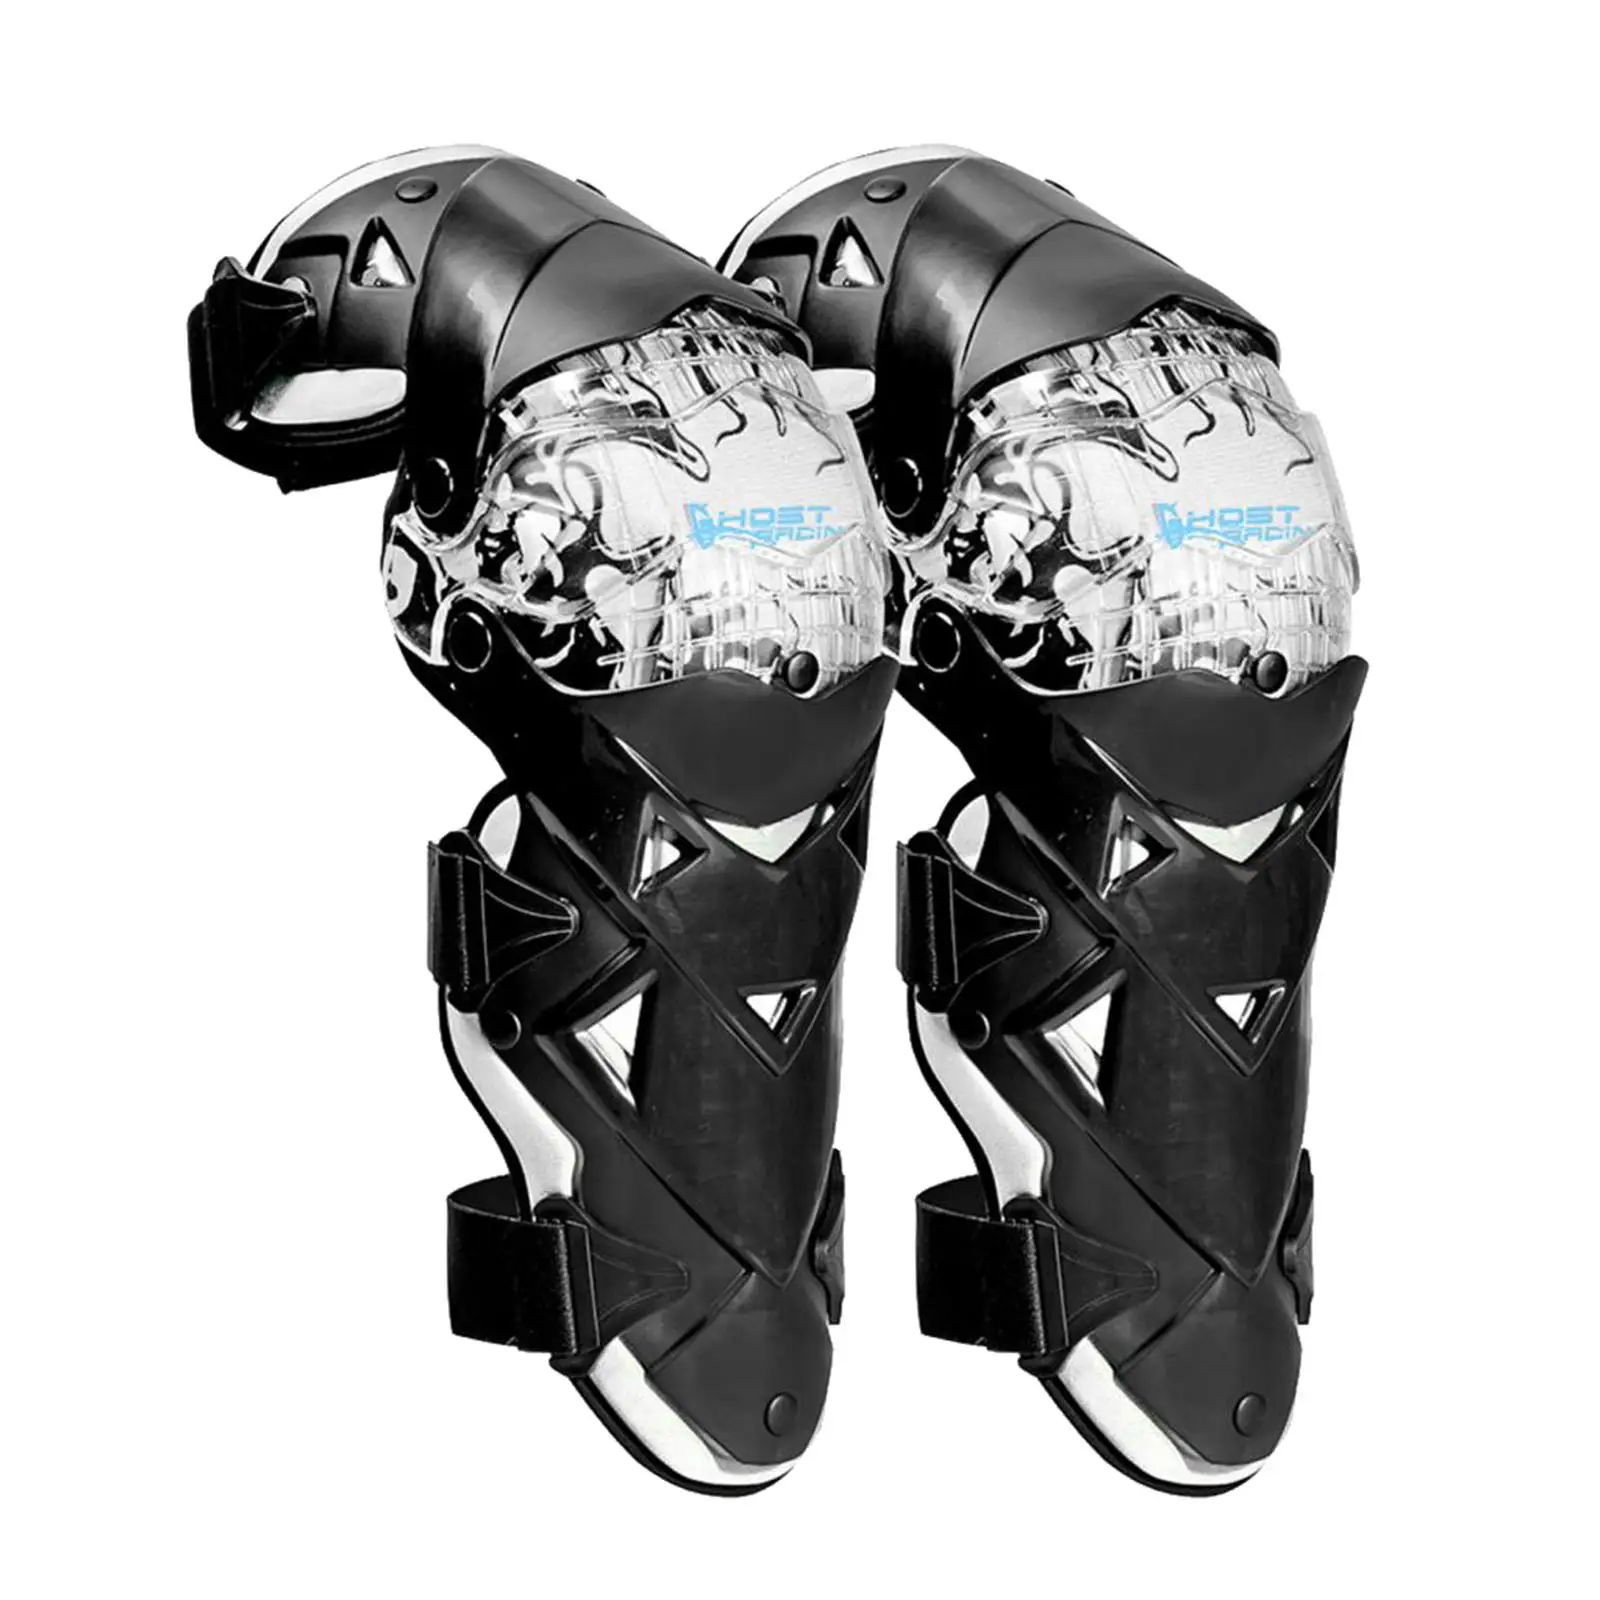 High Quality Motocross Motorcycle Knee  Guards Protective Gear